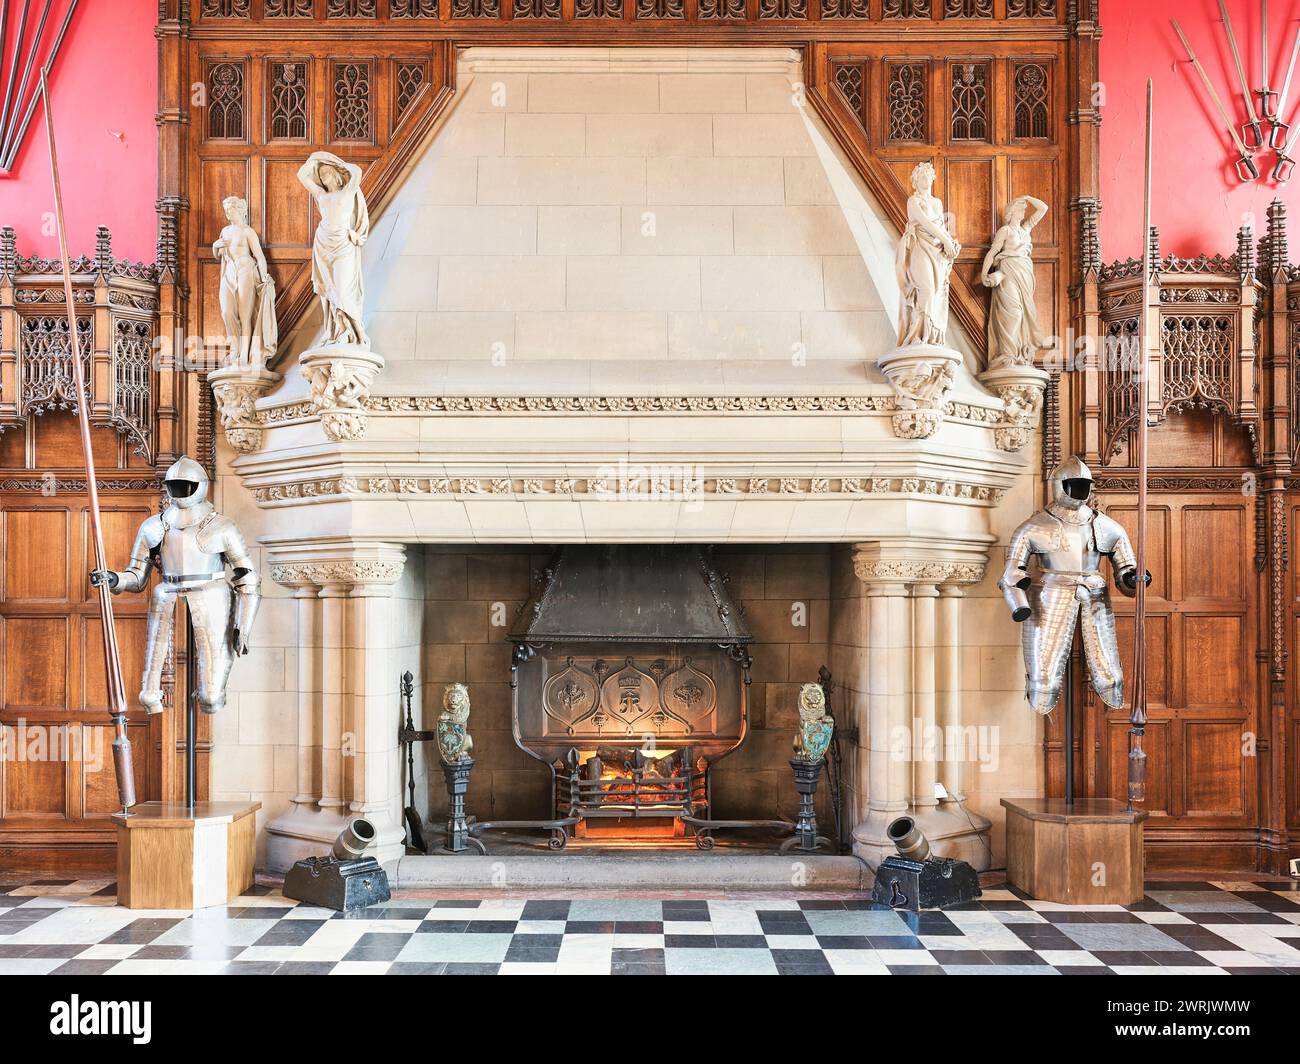 Fireplace in the Great Hall at Edinburgh castle, Scotland. Stock Photo